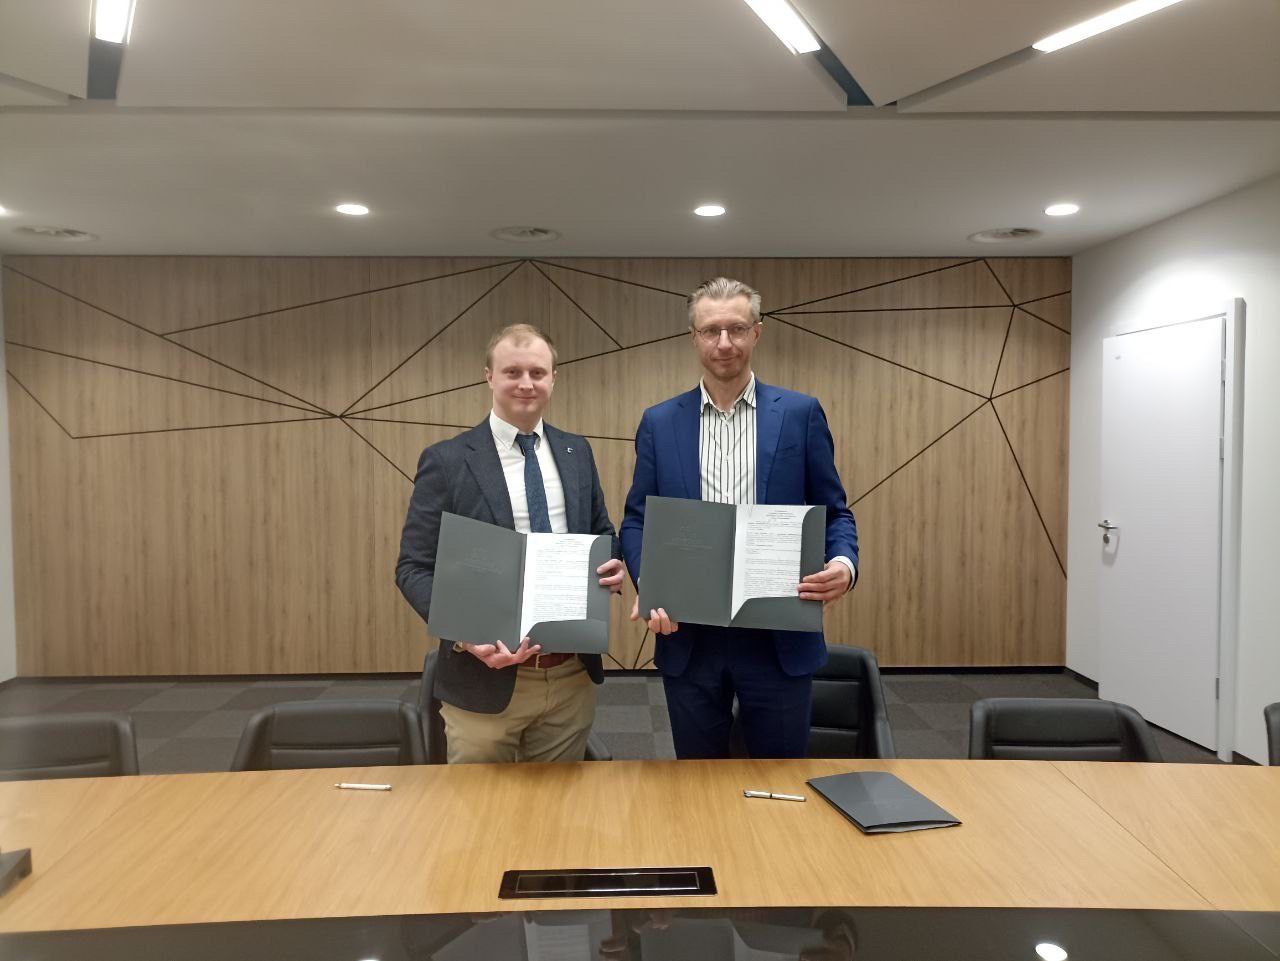 EUCON and the Academy of Economics and Human Sciences in Warsaw have signed a cooperation agreement